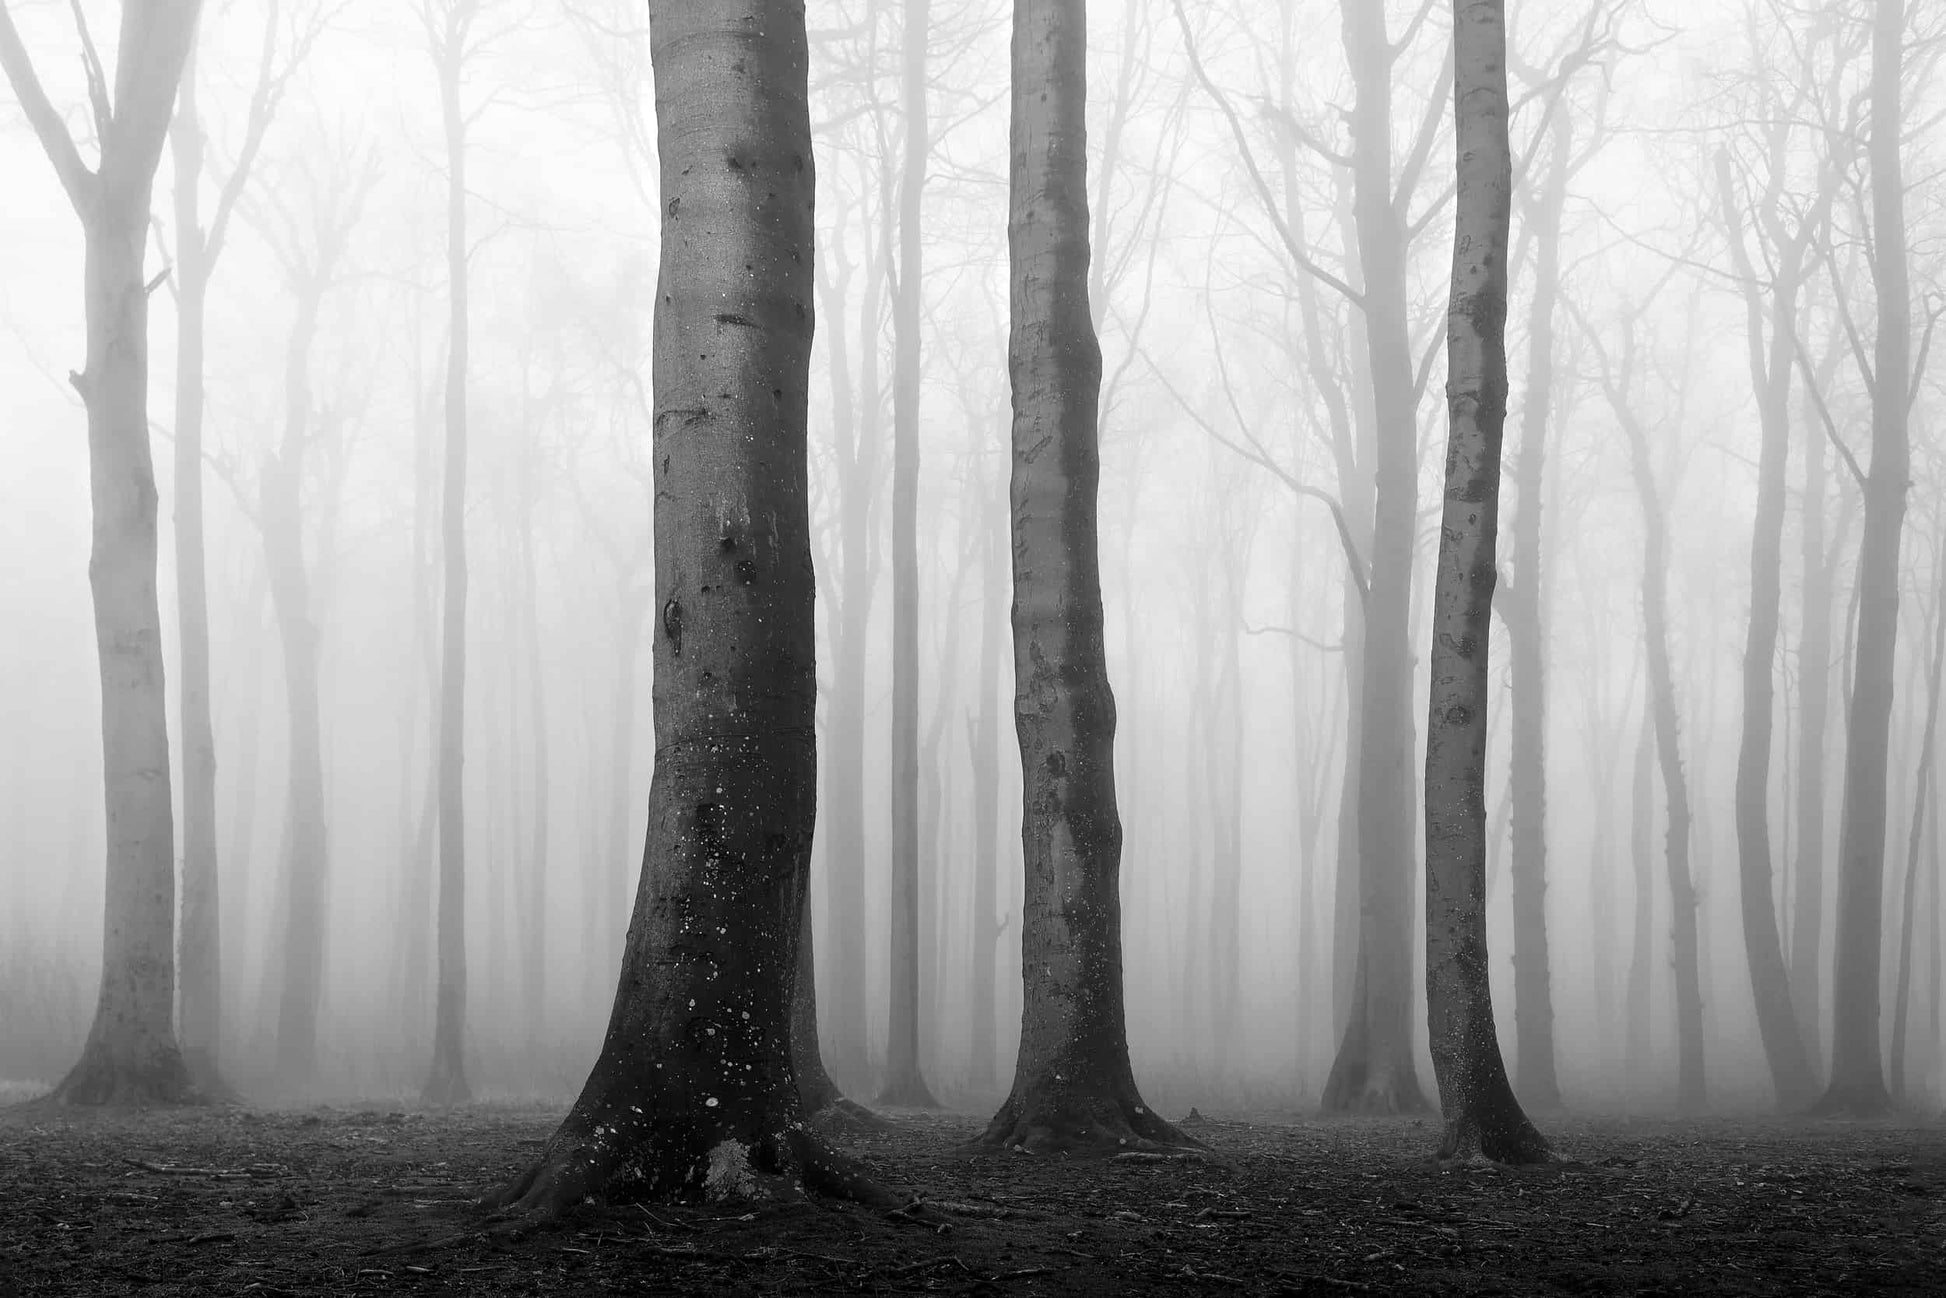 The artpiece 'Parallels Never Meet' by Nina Papiorek showing beautiful tall trees rising up to the sky in a forest covered in fog, creating an eerie atmosphere. The artwork is completely in black and white.